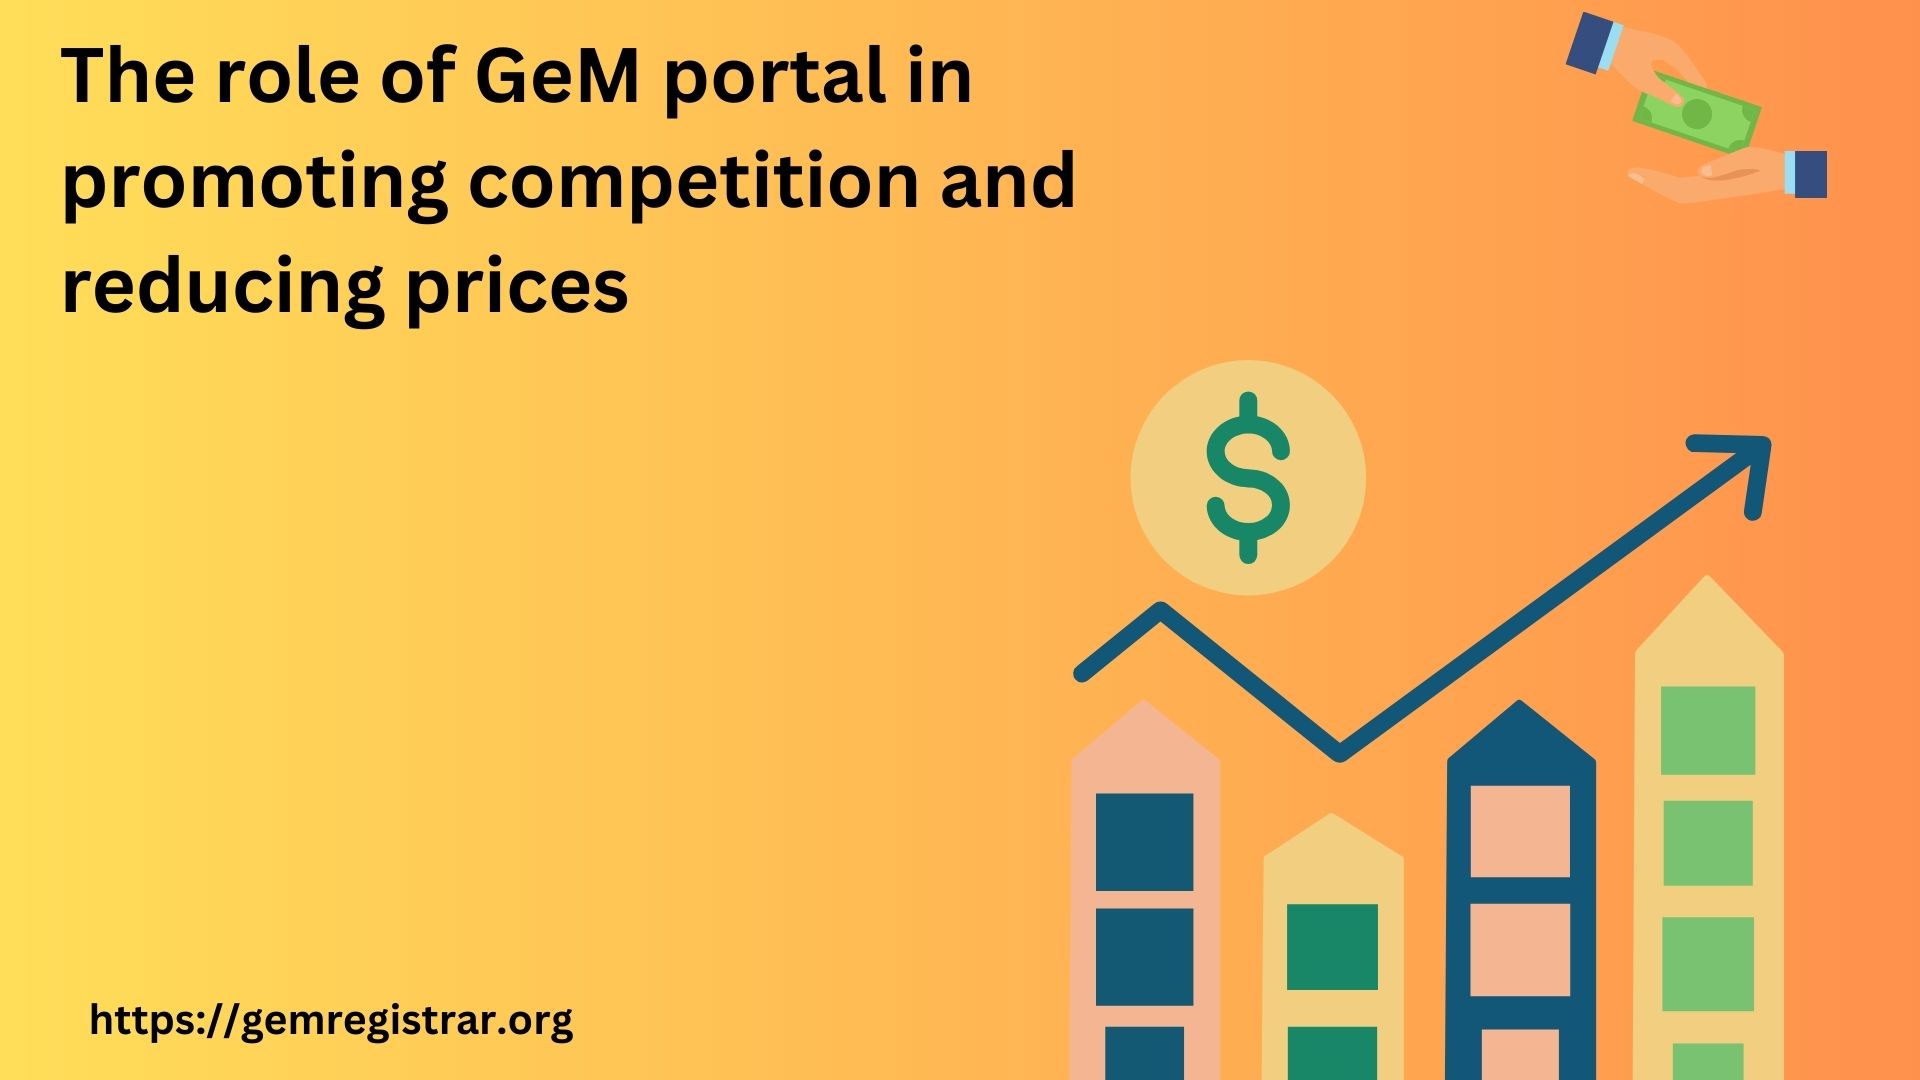 The role of GeM portal in promoting competition and reducing prices